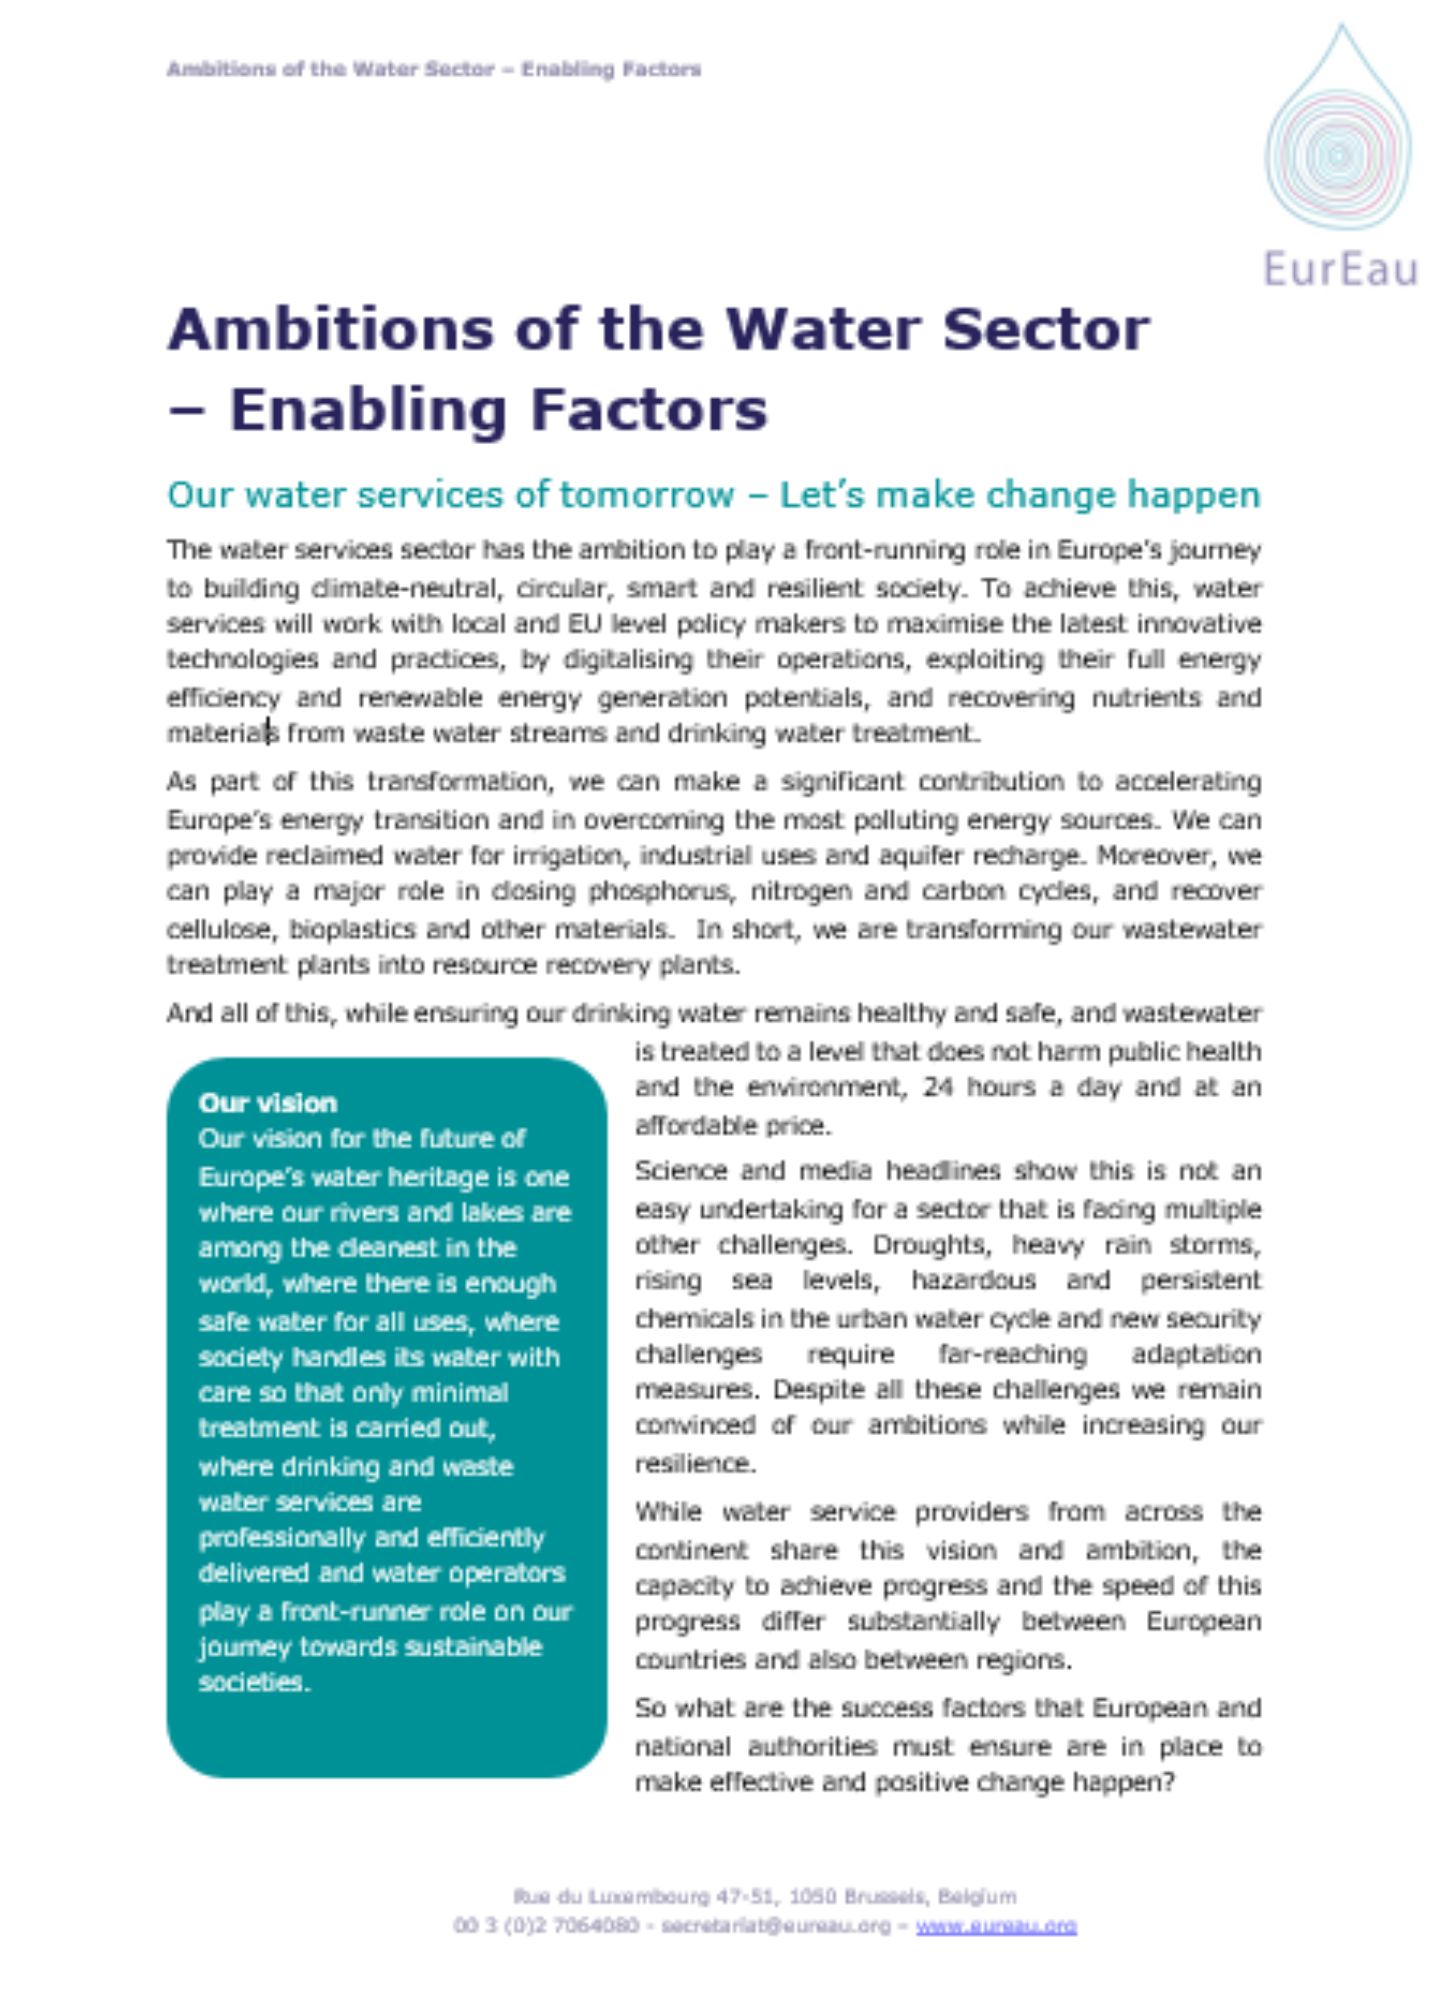 Ambitions of the water sector - Enabling factors